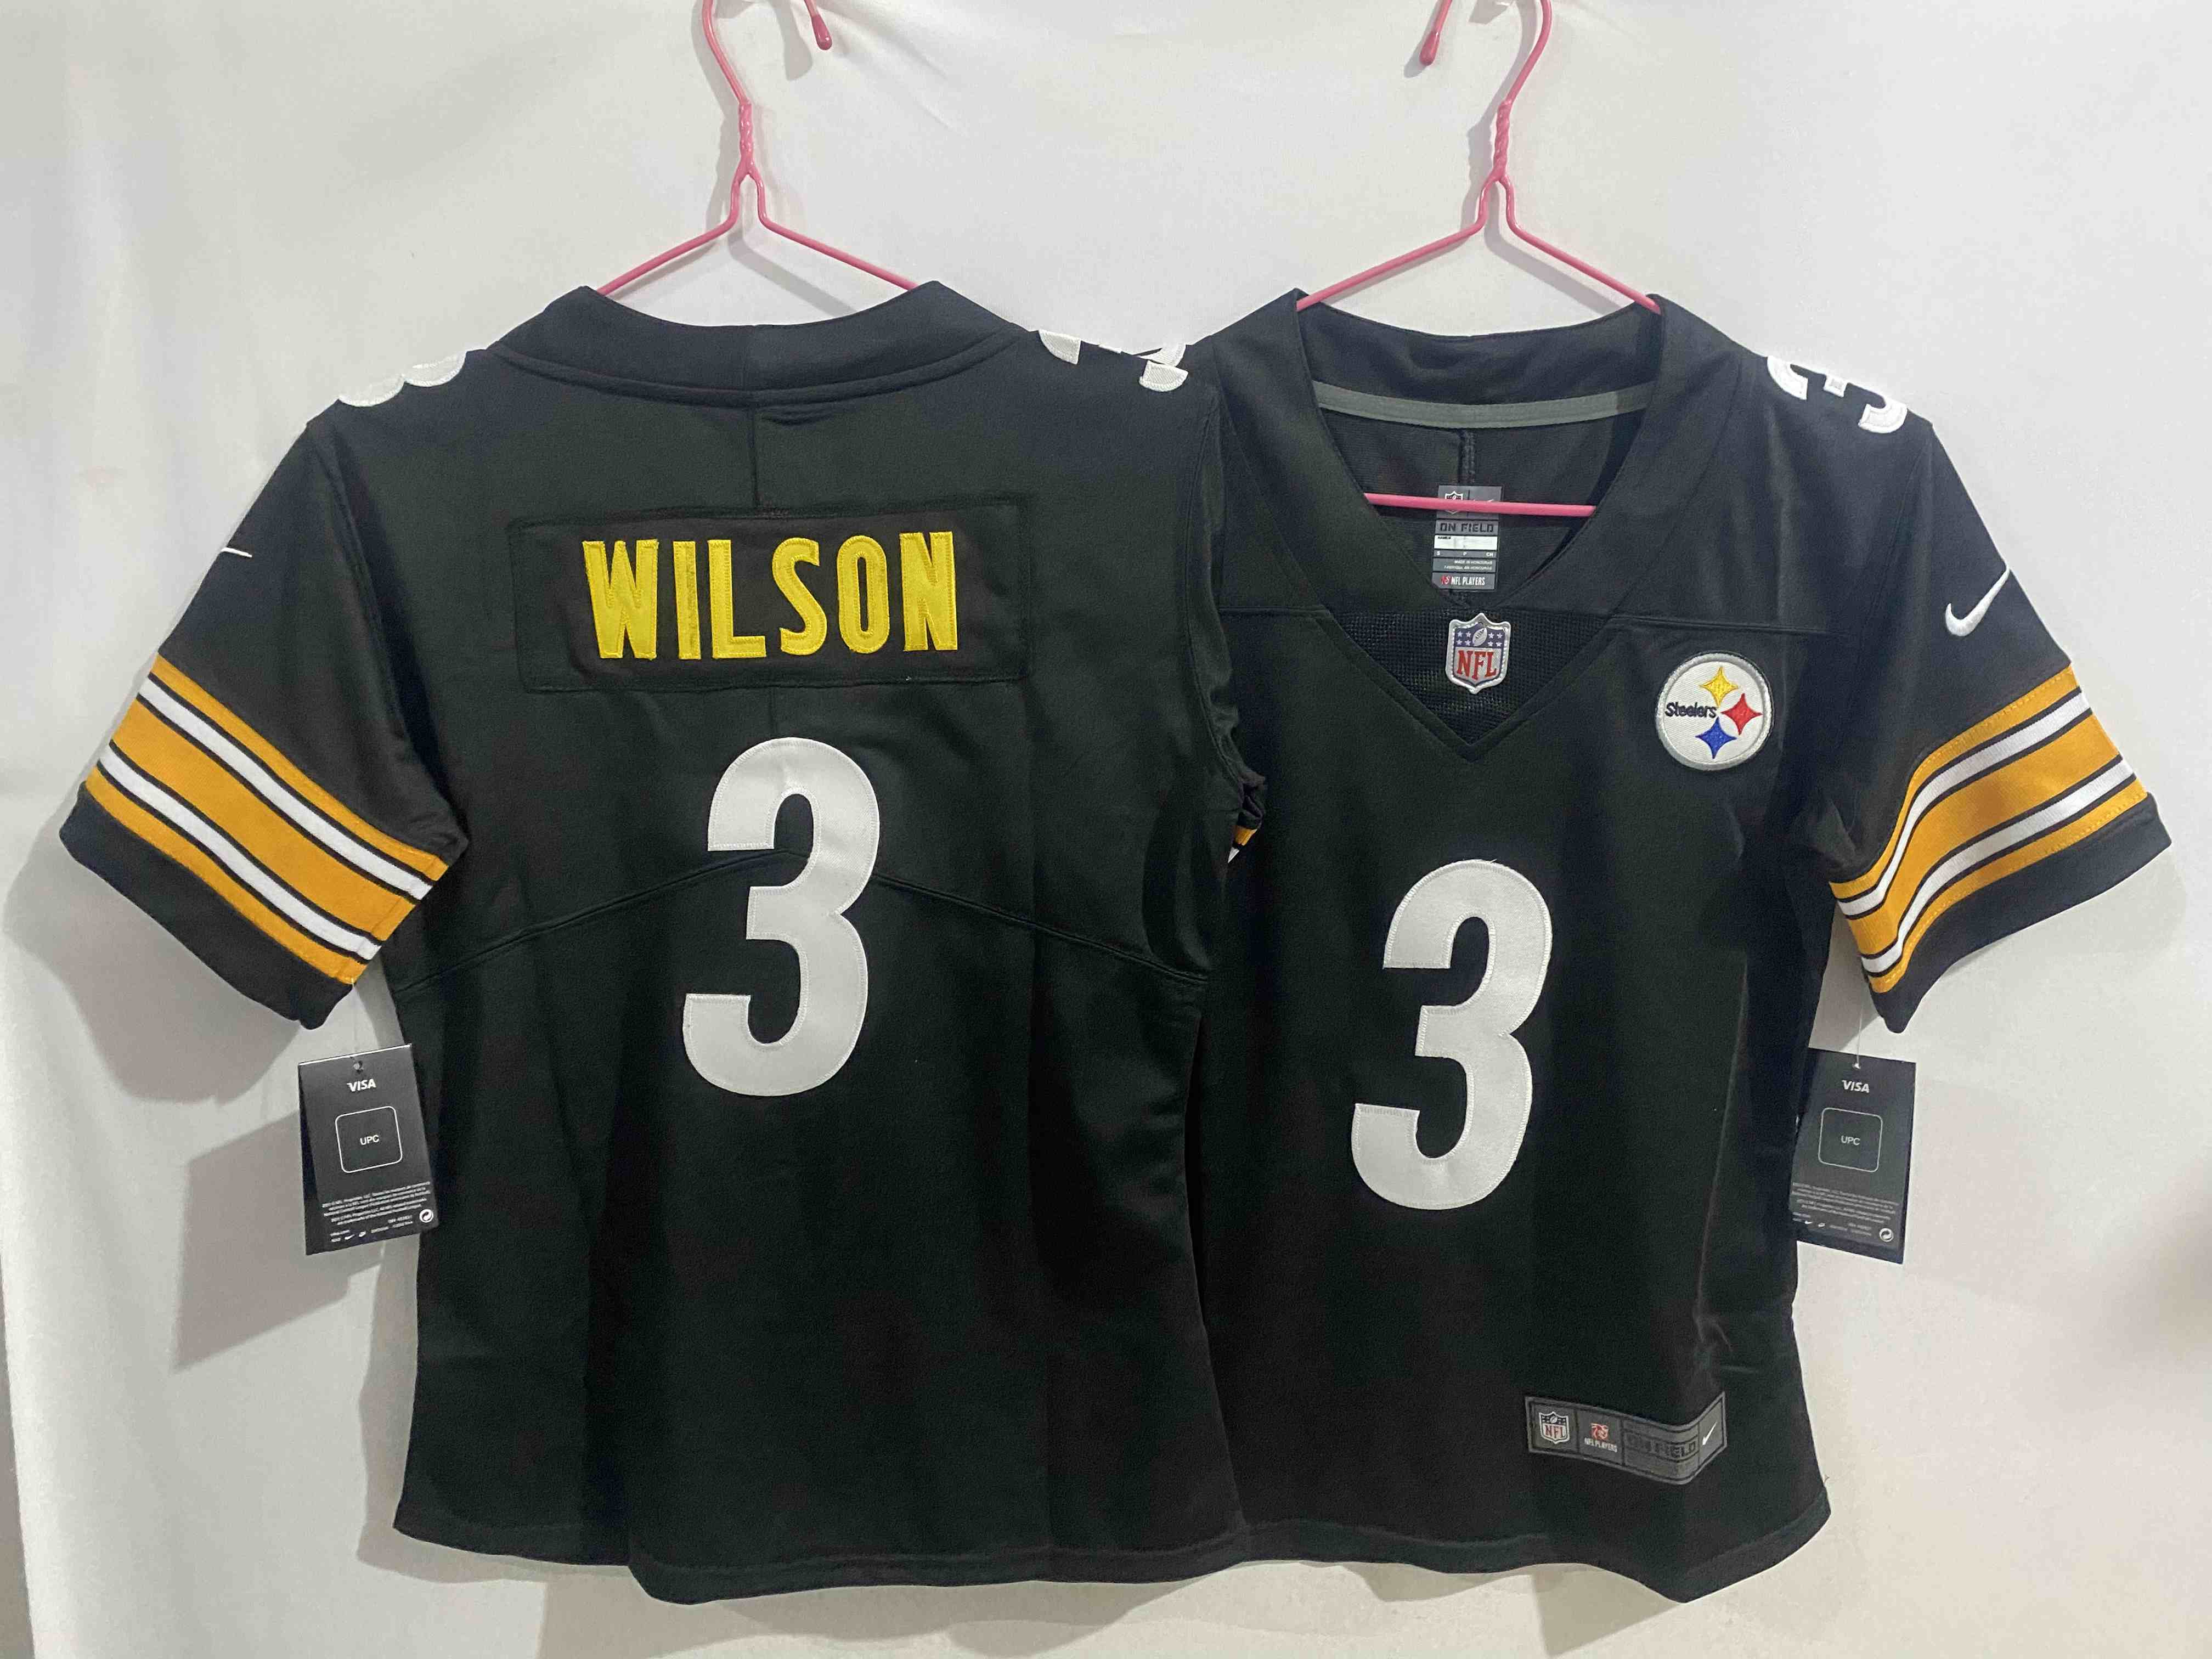 Women's Pittsburgh Steelers #3 Russell Wilson Black Vapor Untouchable Limited Football Stitched Jersey